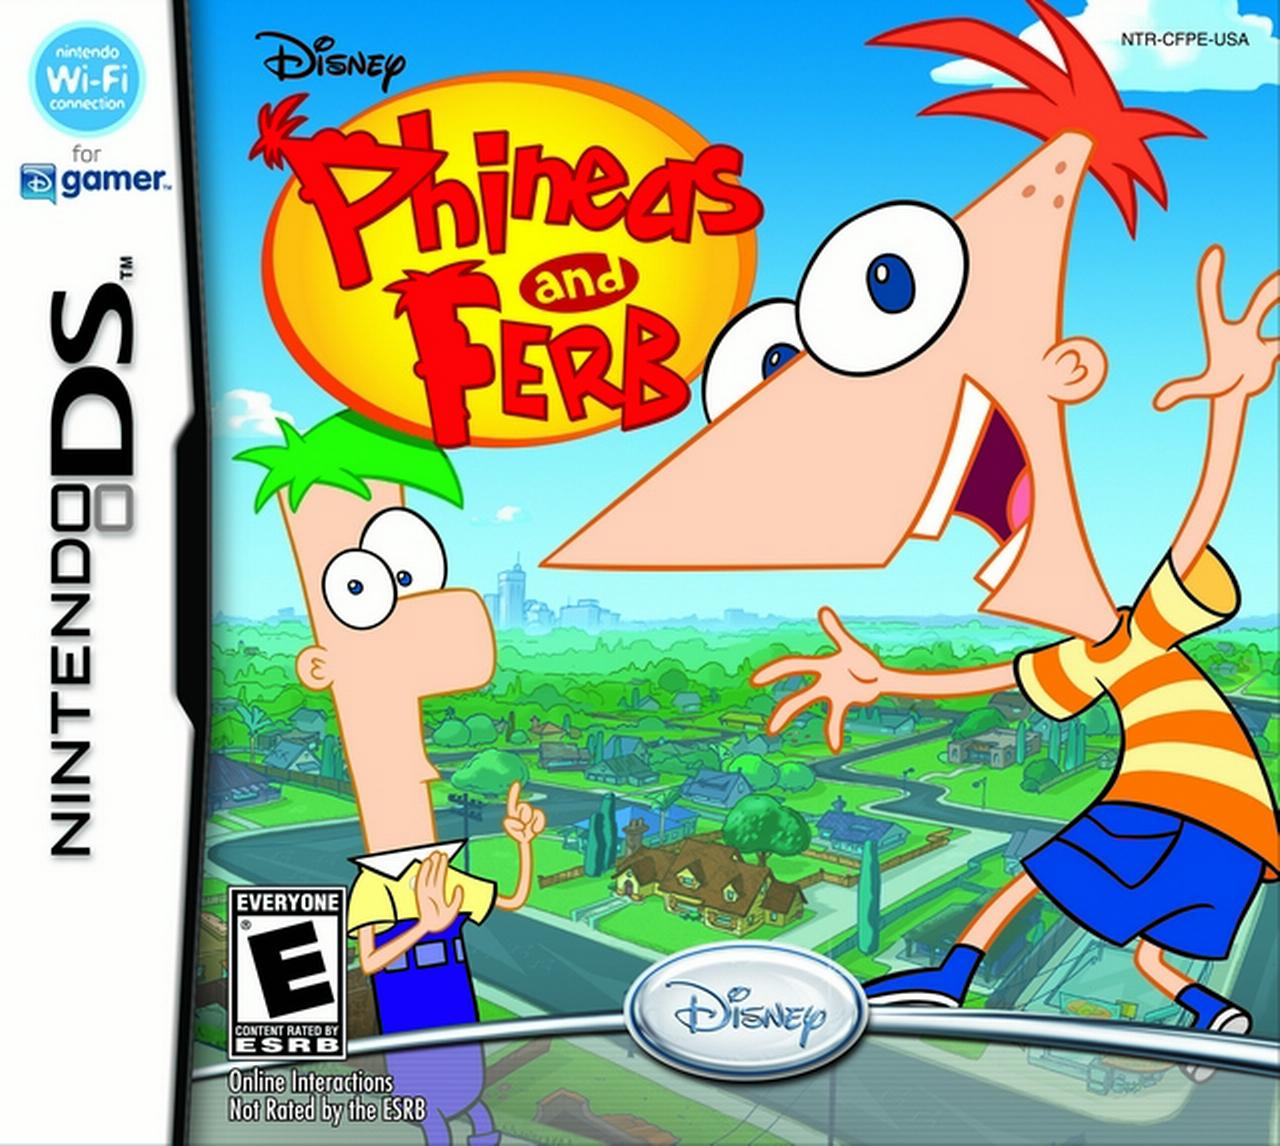 Phineas and Ferb, Disney, Nintendo DS, (Physical Edition) - image 1 of 9